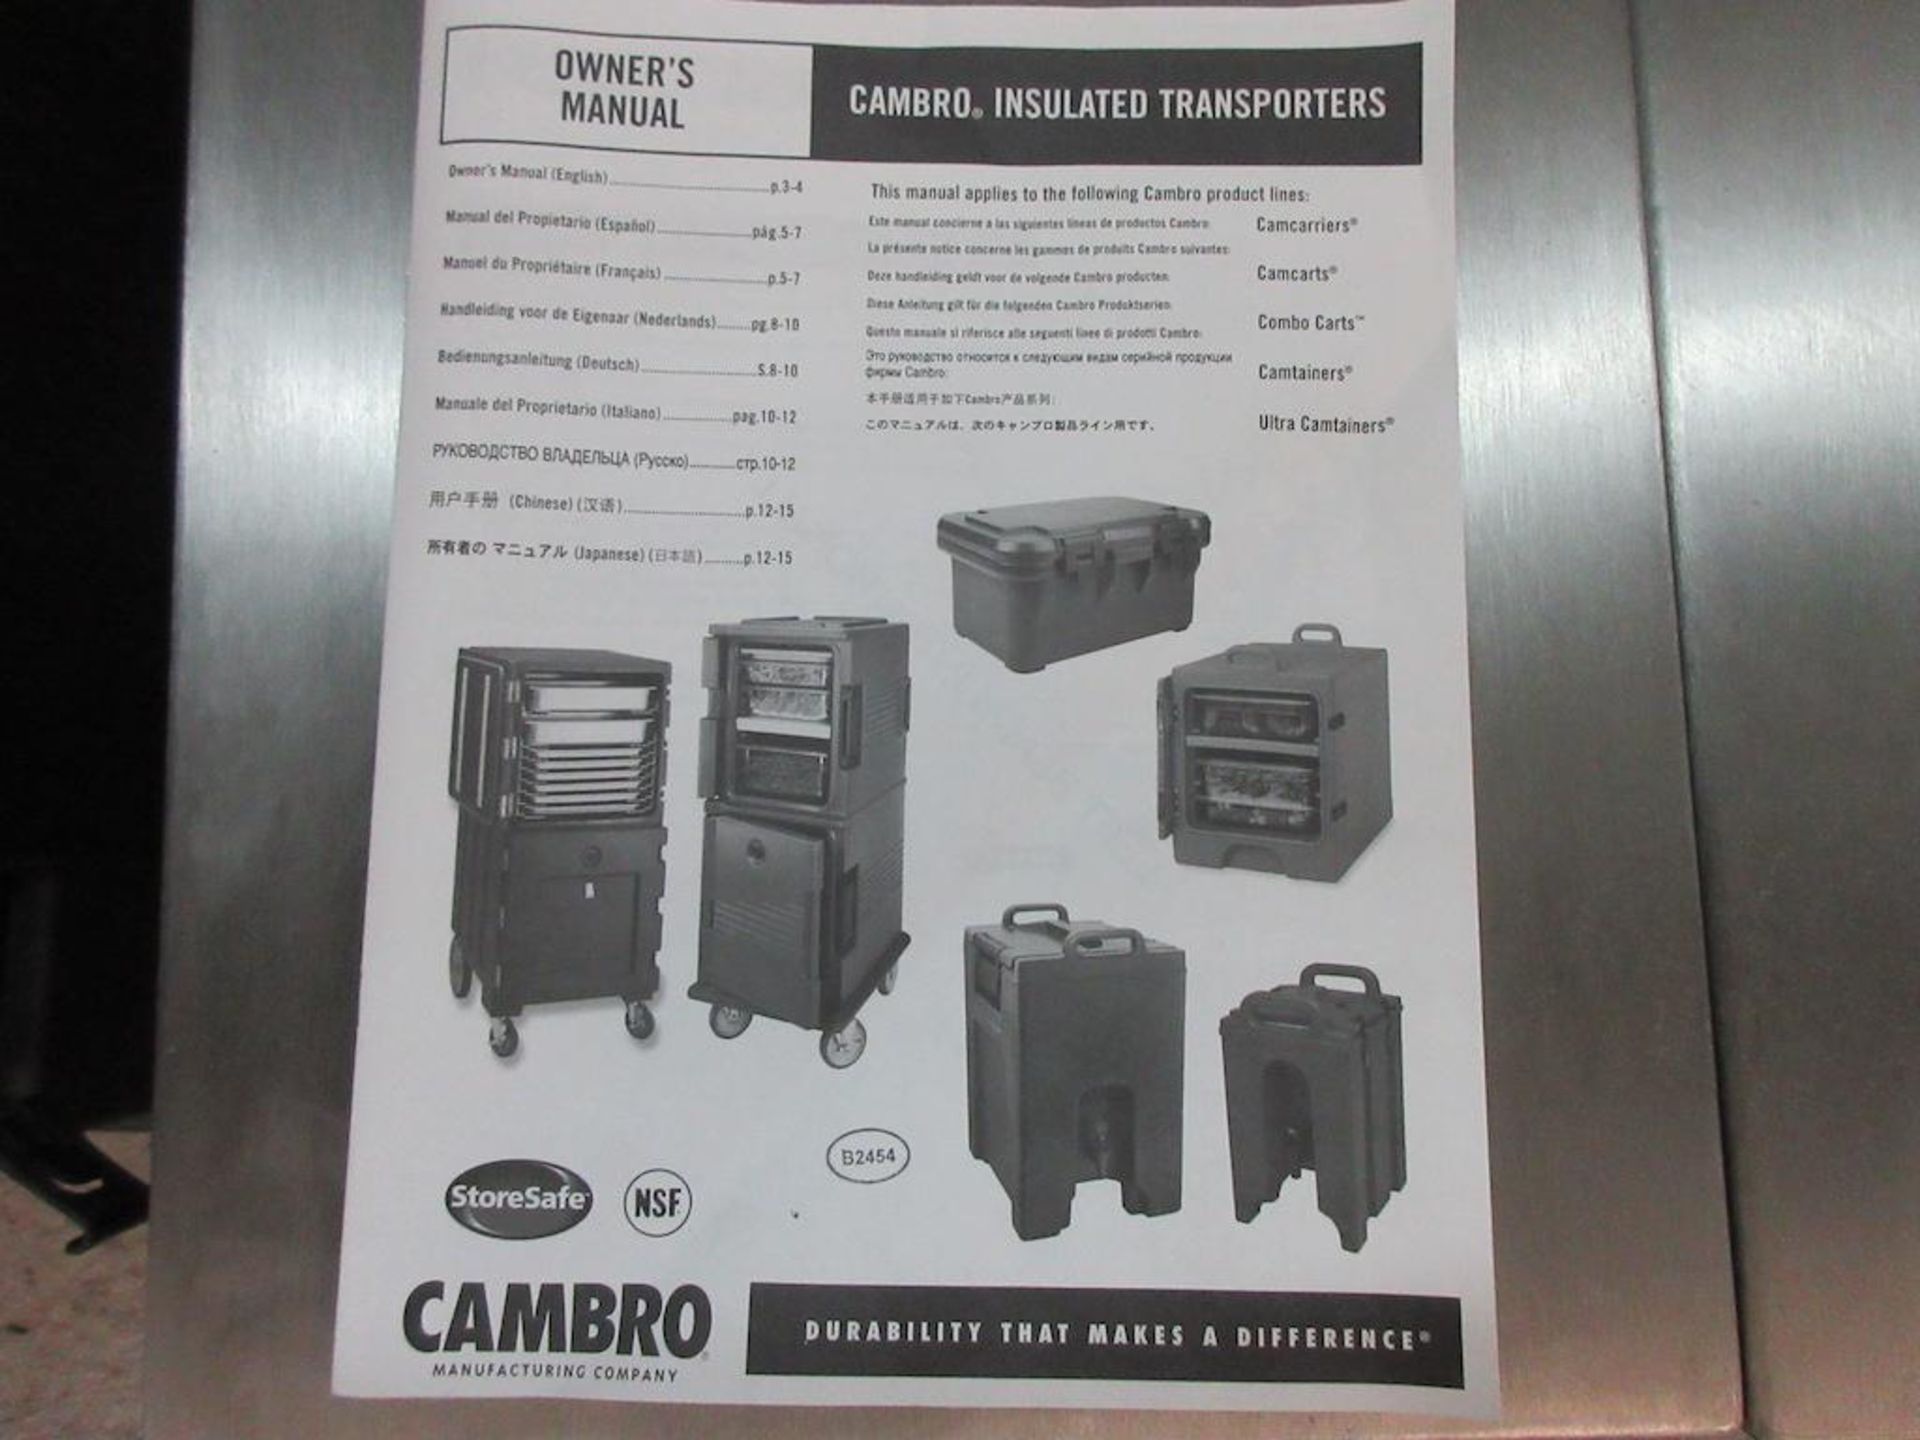 Lot 6 Cambro insulated transporters, 17"w x 24"d x 20"h, adjustable shelves, plus 2 rolling bases - Image 4 of 6